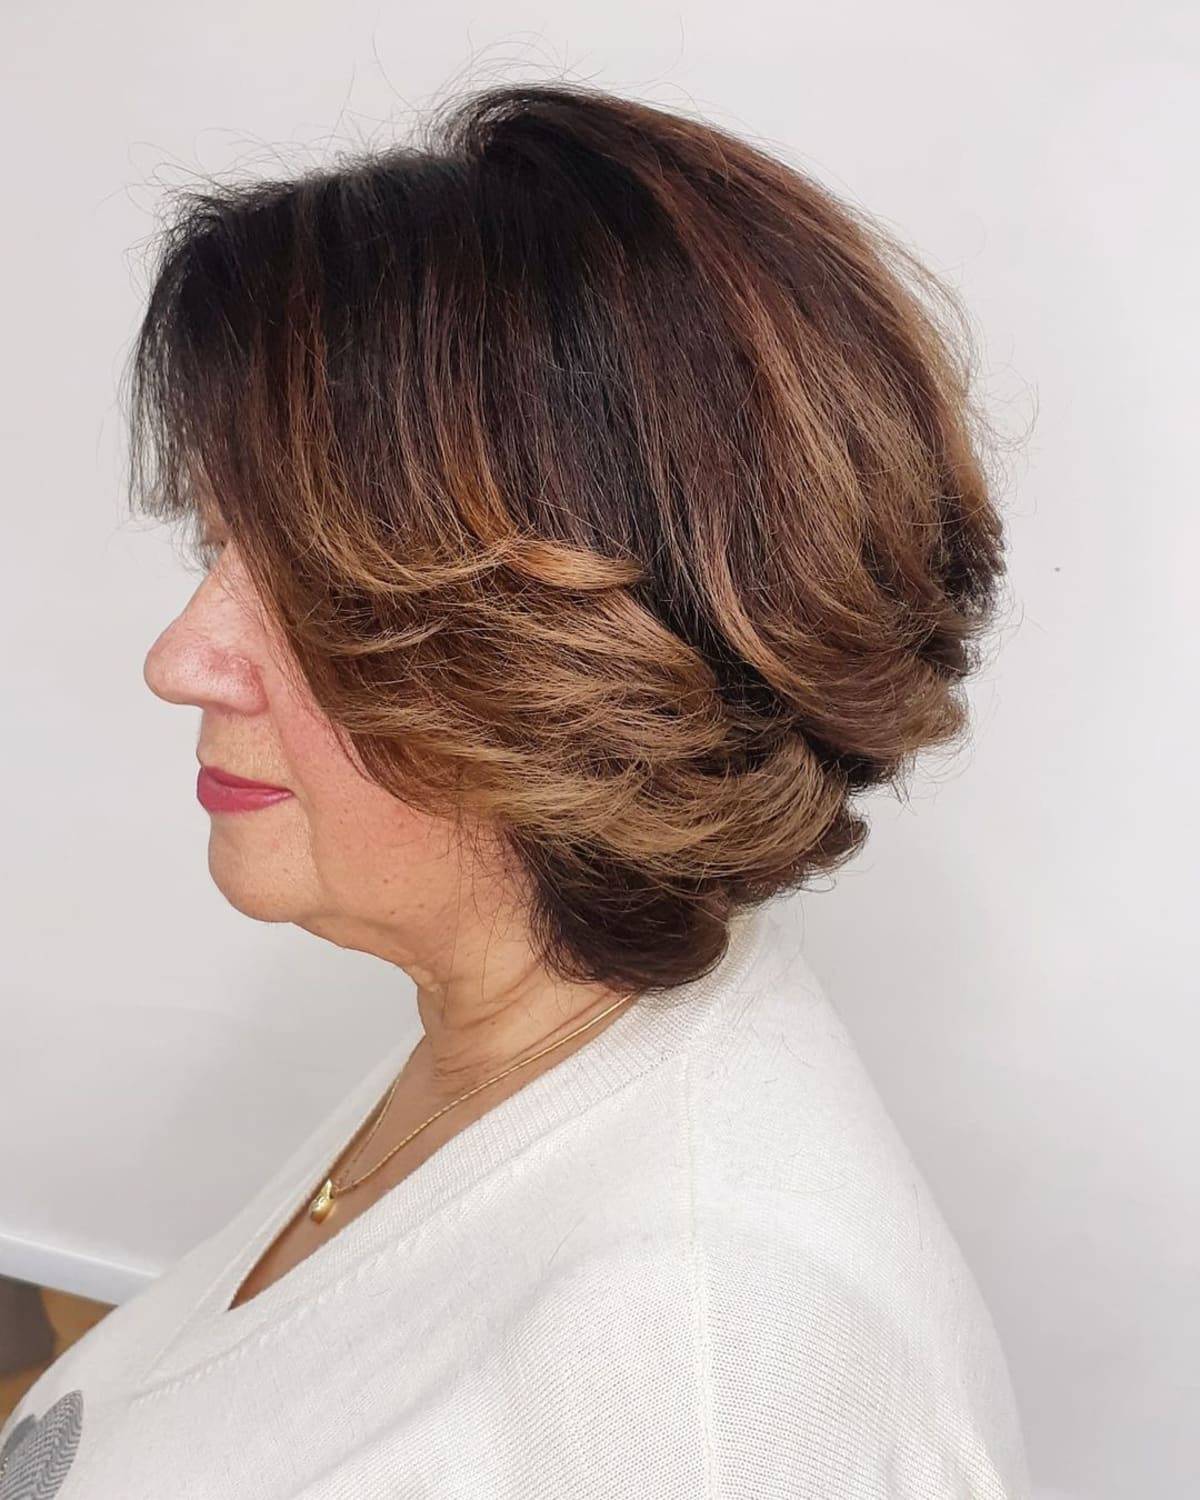 Feathered Bob Cut for Women Over 40